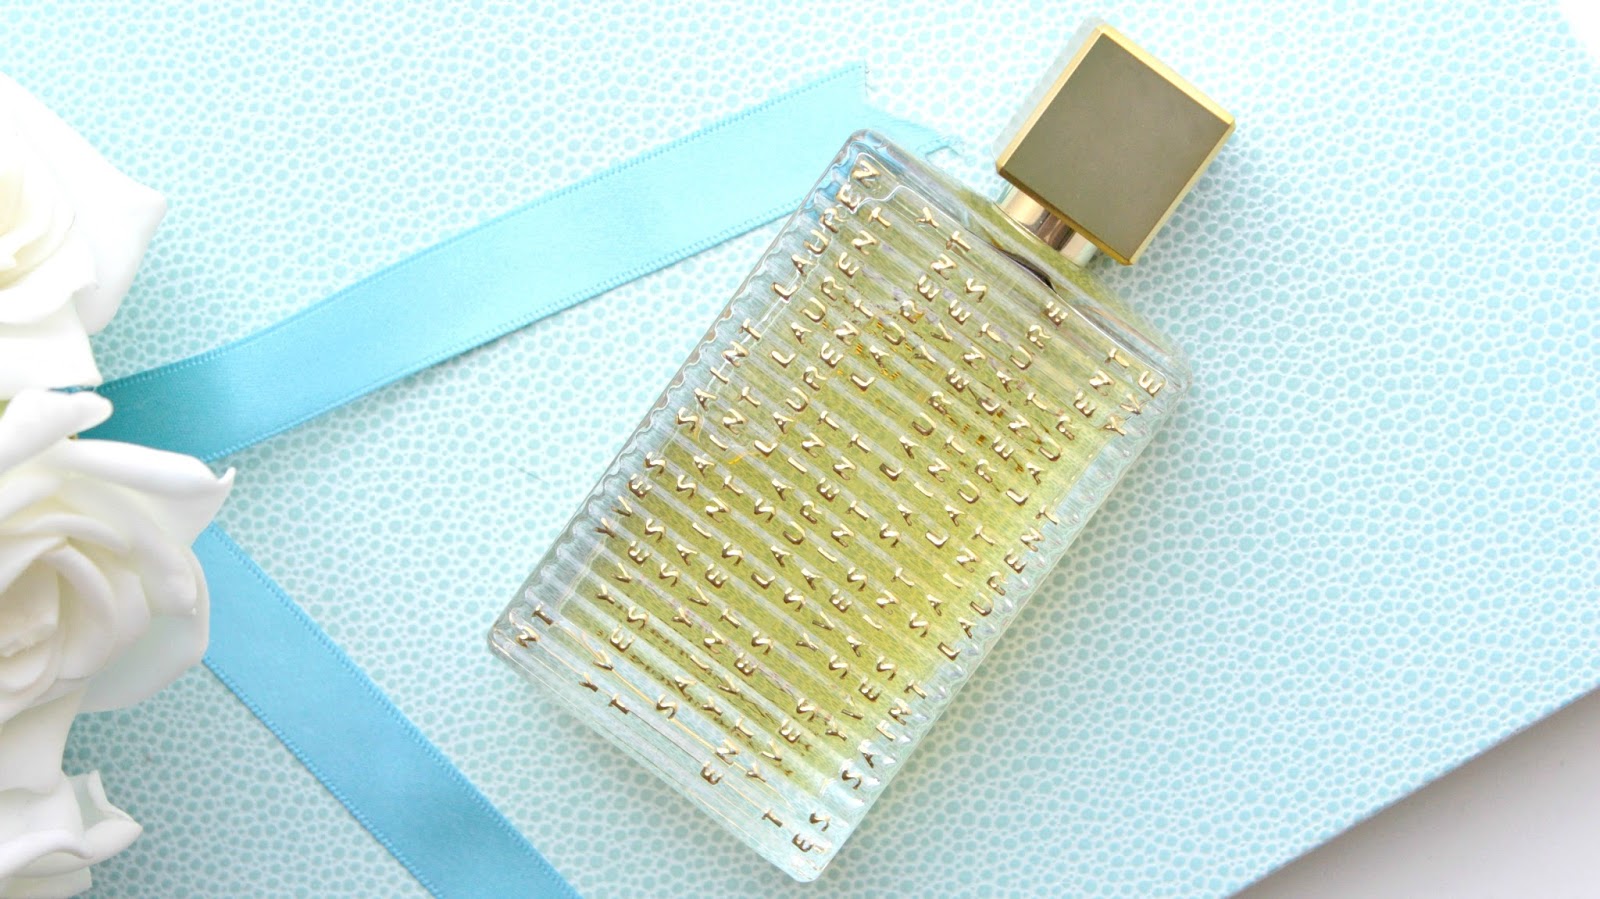 Beauty and the Chic: YSL Cinéma Perfume